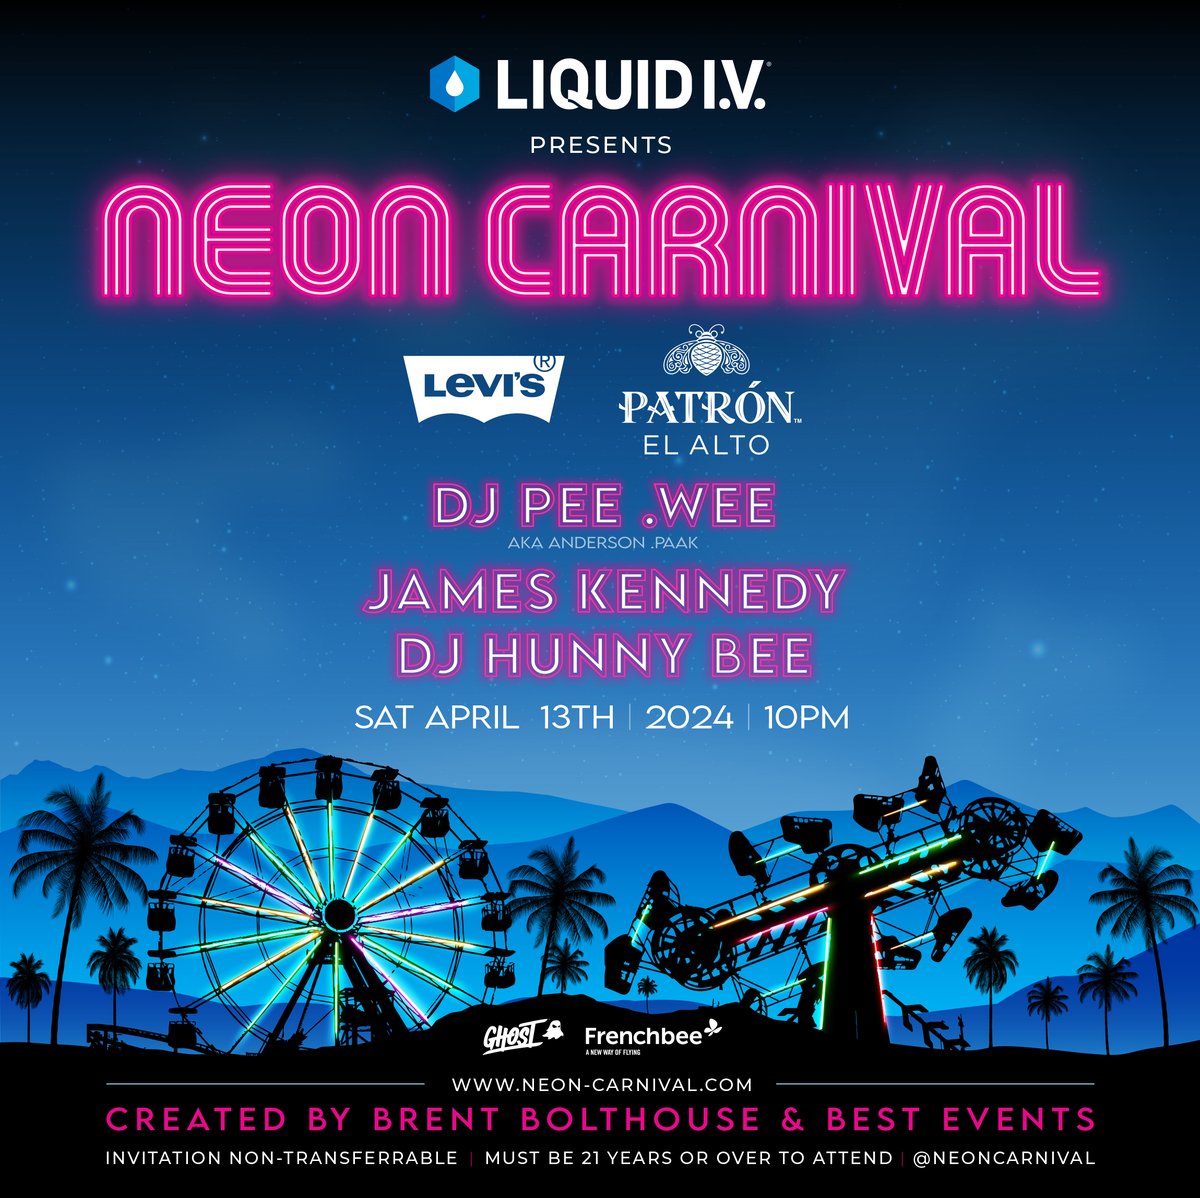 Who's going to Coachella?! @Apecoin is a sponsor of the 13th annual @Neon_Carnival, which will take place on Saturday, April 13th, 2024 in the Coachella Valley desert from 10PM to 4AM. The coveted invite-only party has always been known for its exclusivity, with a guest list of